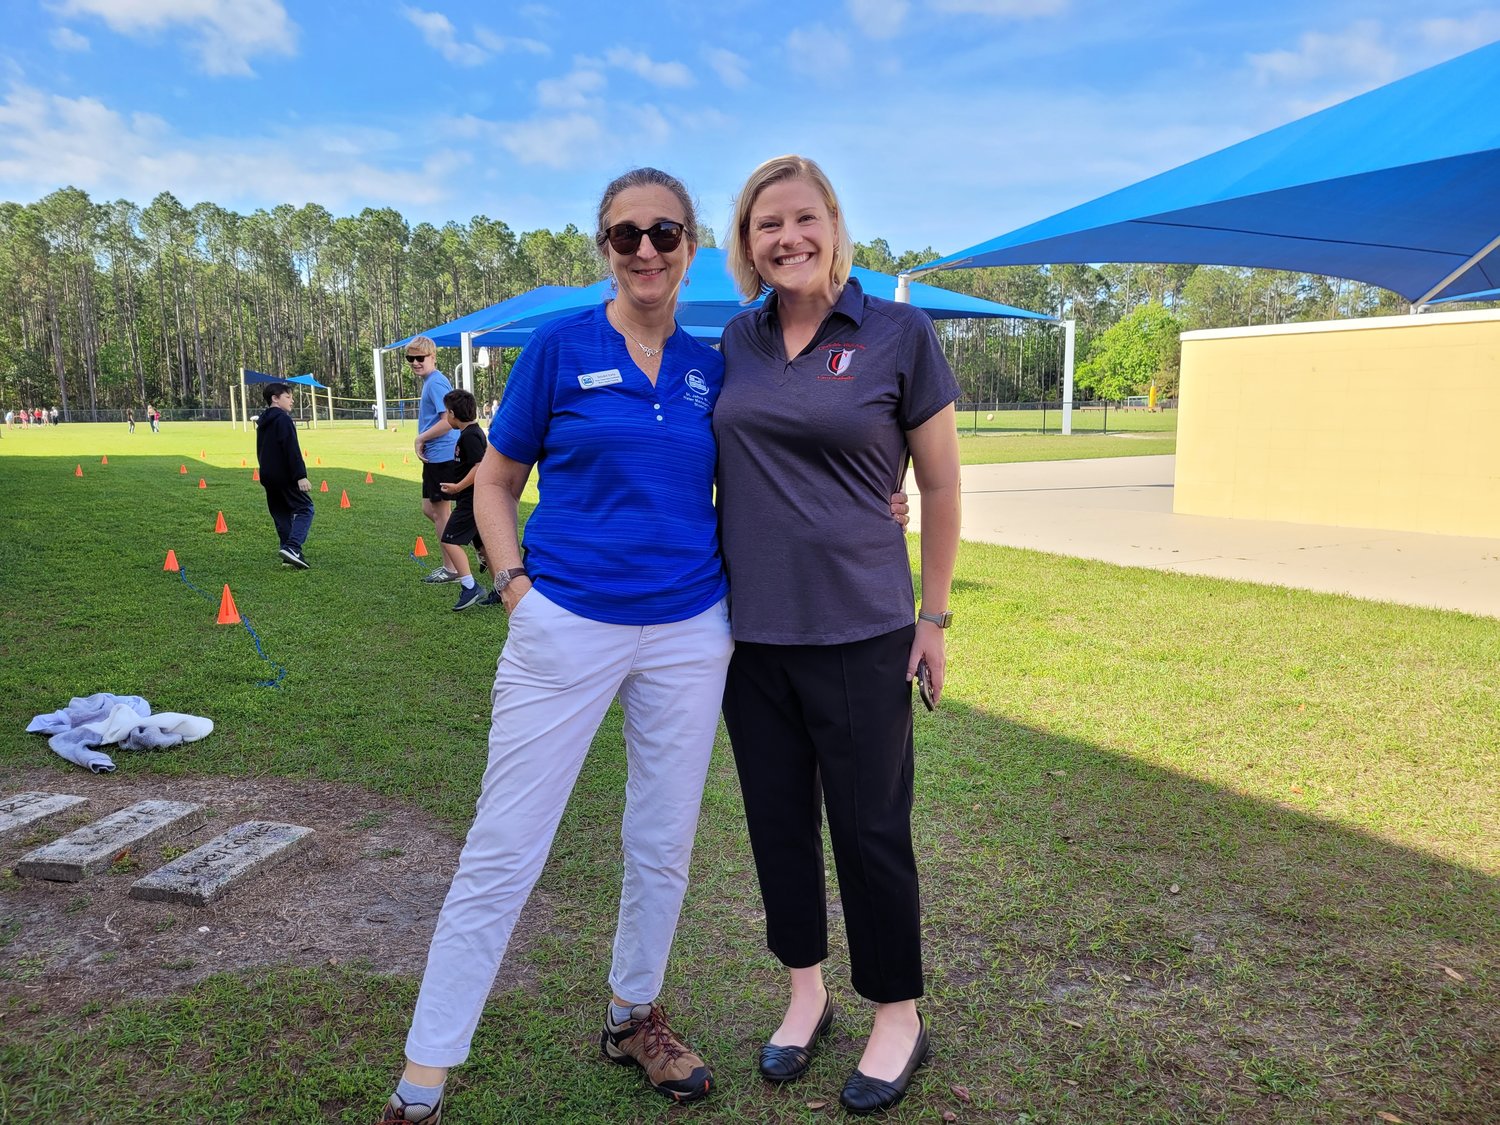 Deirdre Irwin, St. Johns River Water Management District water conservation coordinator, and Alicia “Ali” Pressel, St. Johns County School District secondary school science teacher at Creekside High School and 2020-21 Teacher of the Year.